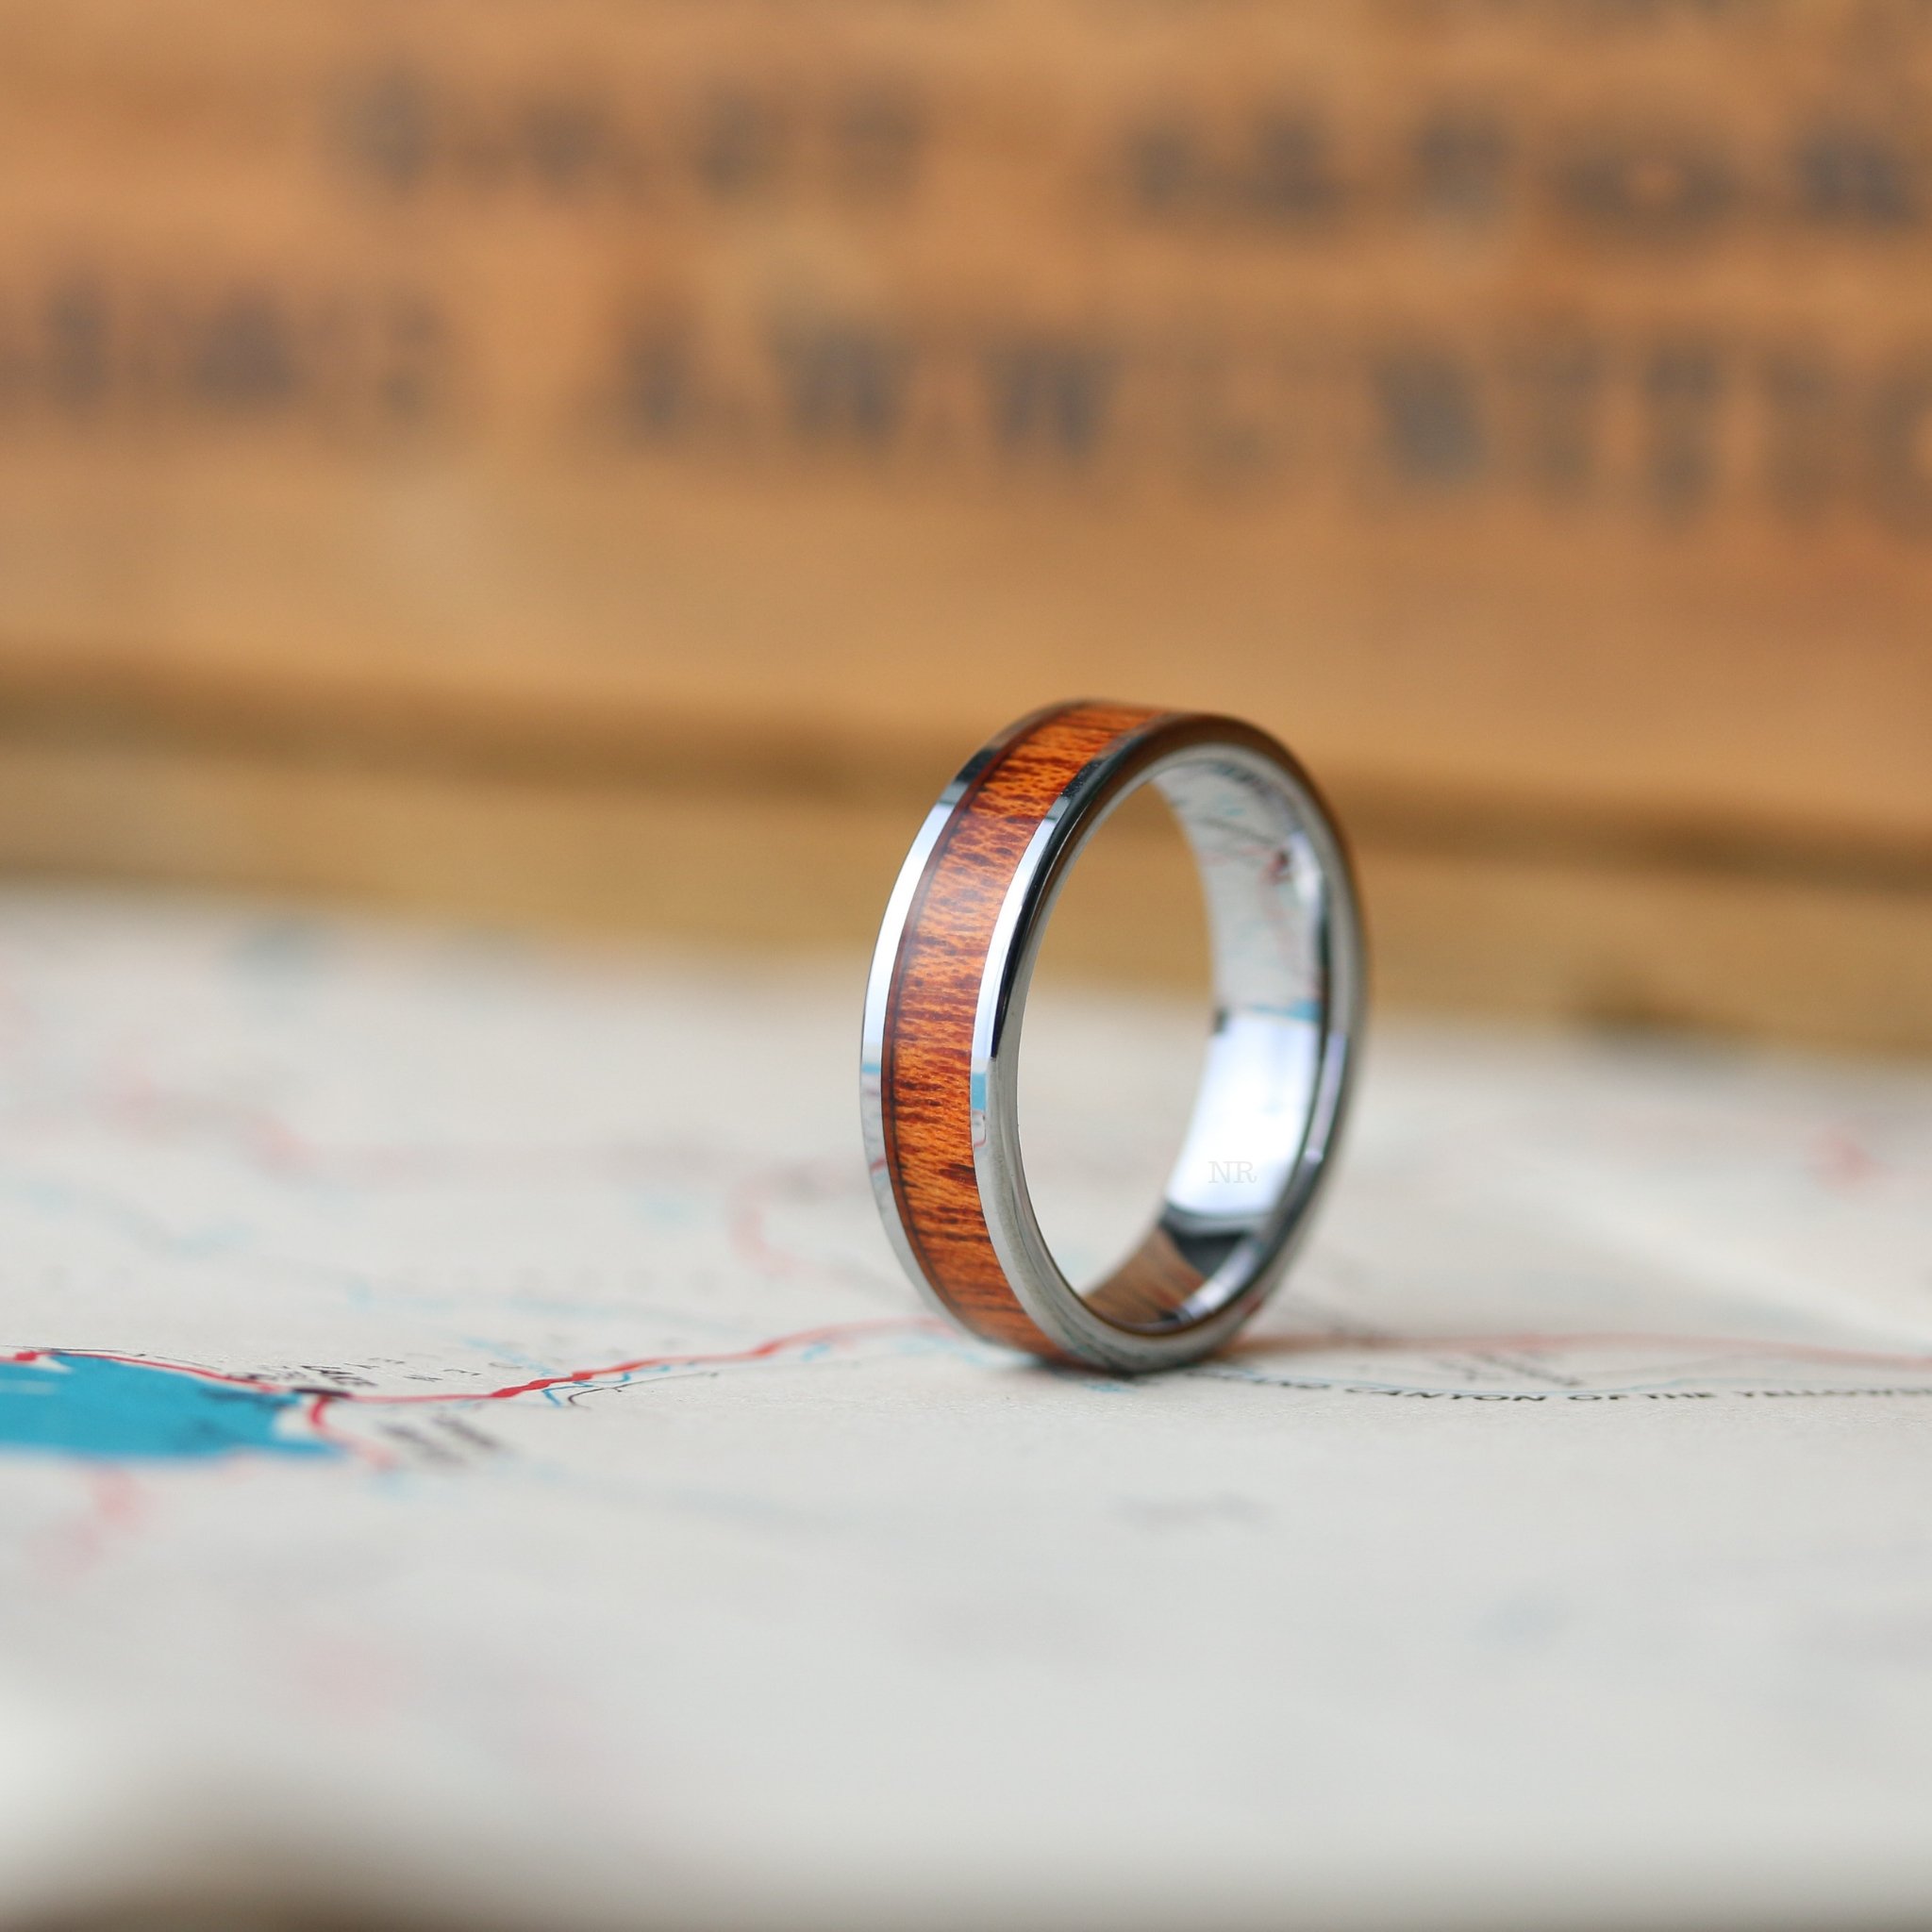 Men's - Wood Wedding Band / Crafted out of Tungsten Carbide